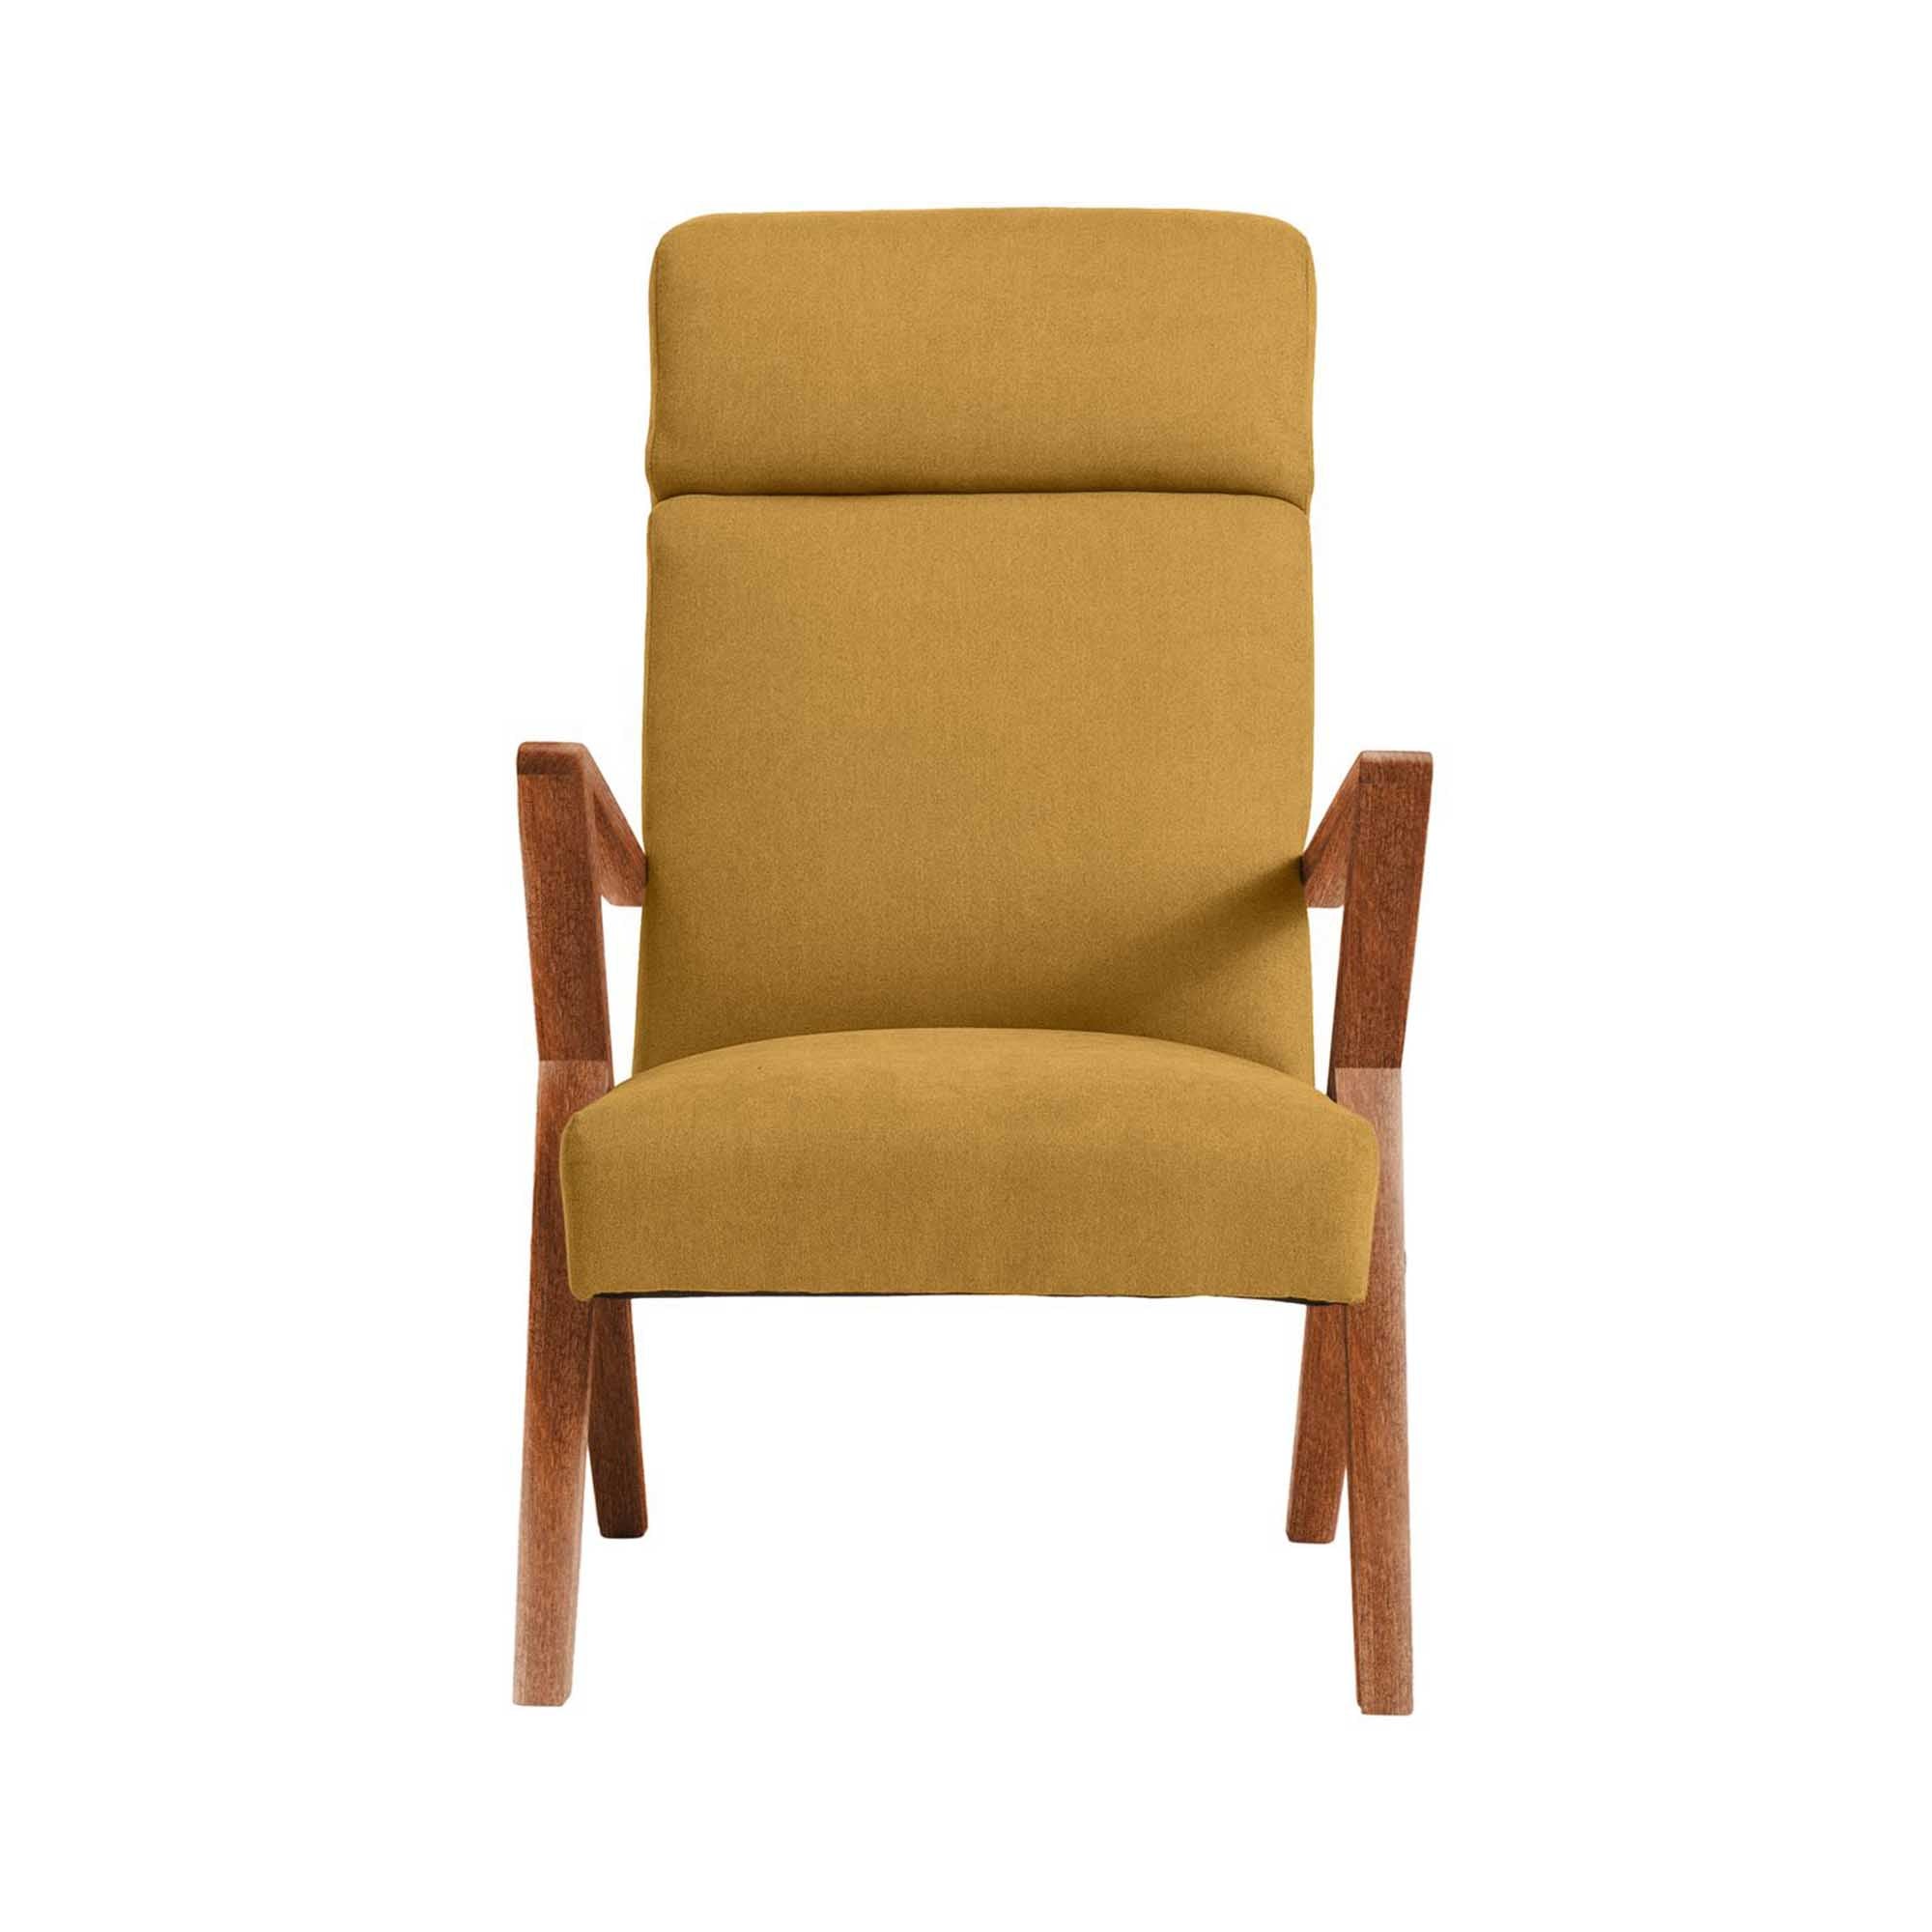 Lounge Chair, Beech Wood Frame, Walnut Colour yellow fabric, front view